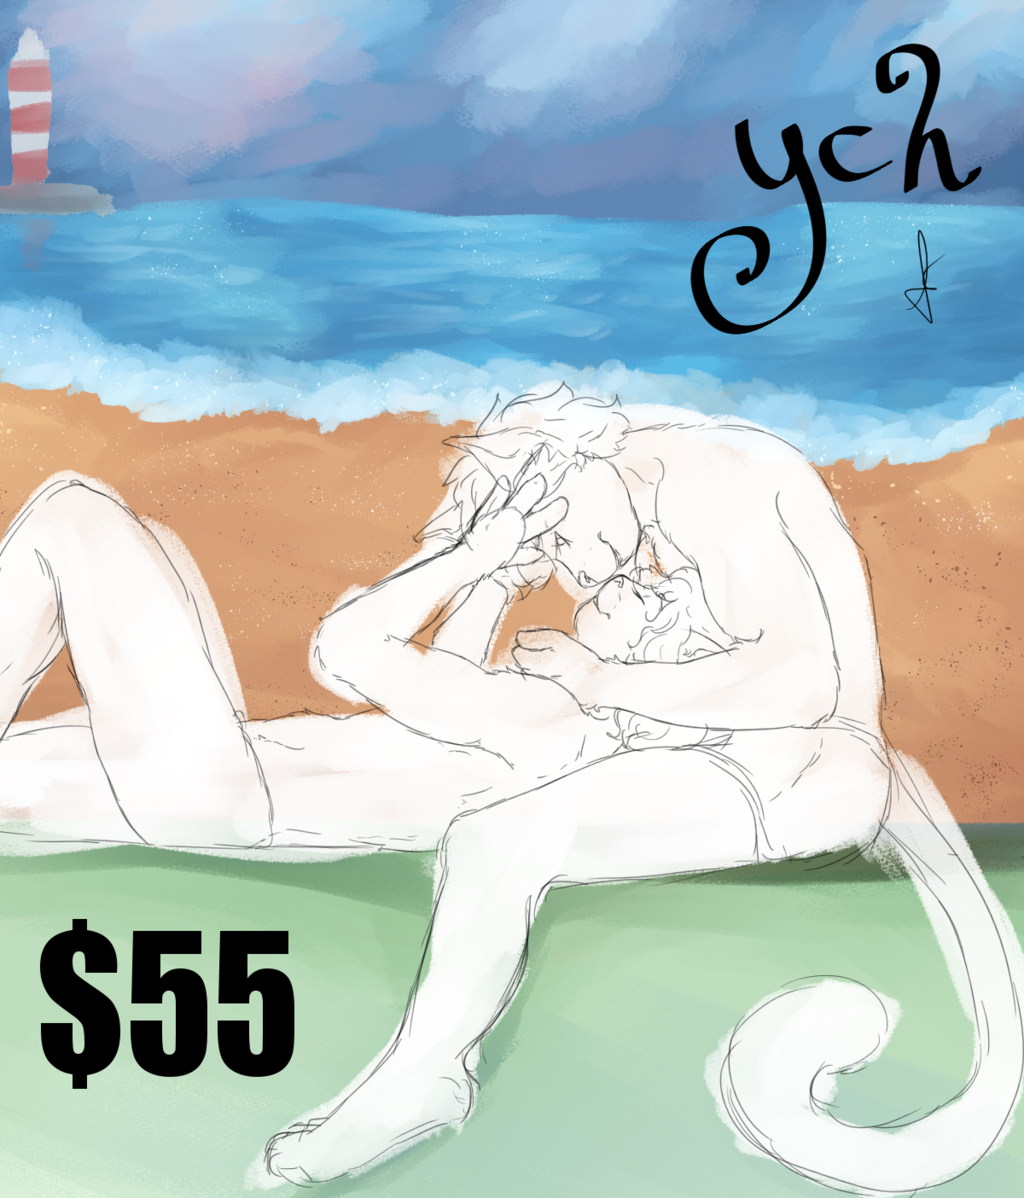 OPEN FIXED PRICE YCH - Unrestrained Summer Fun